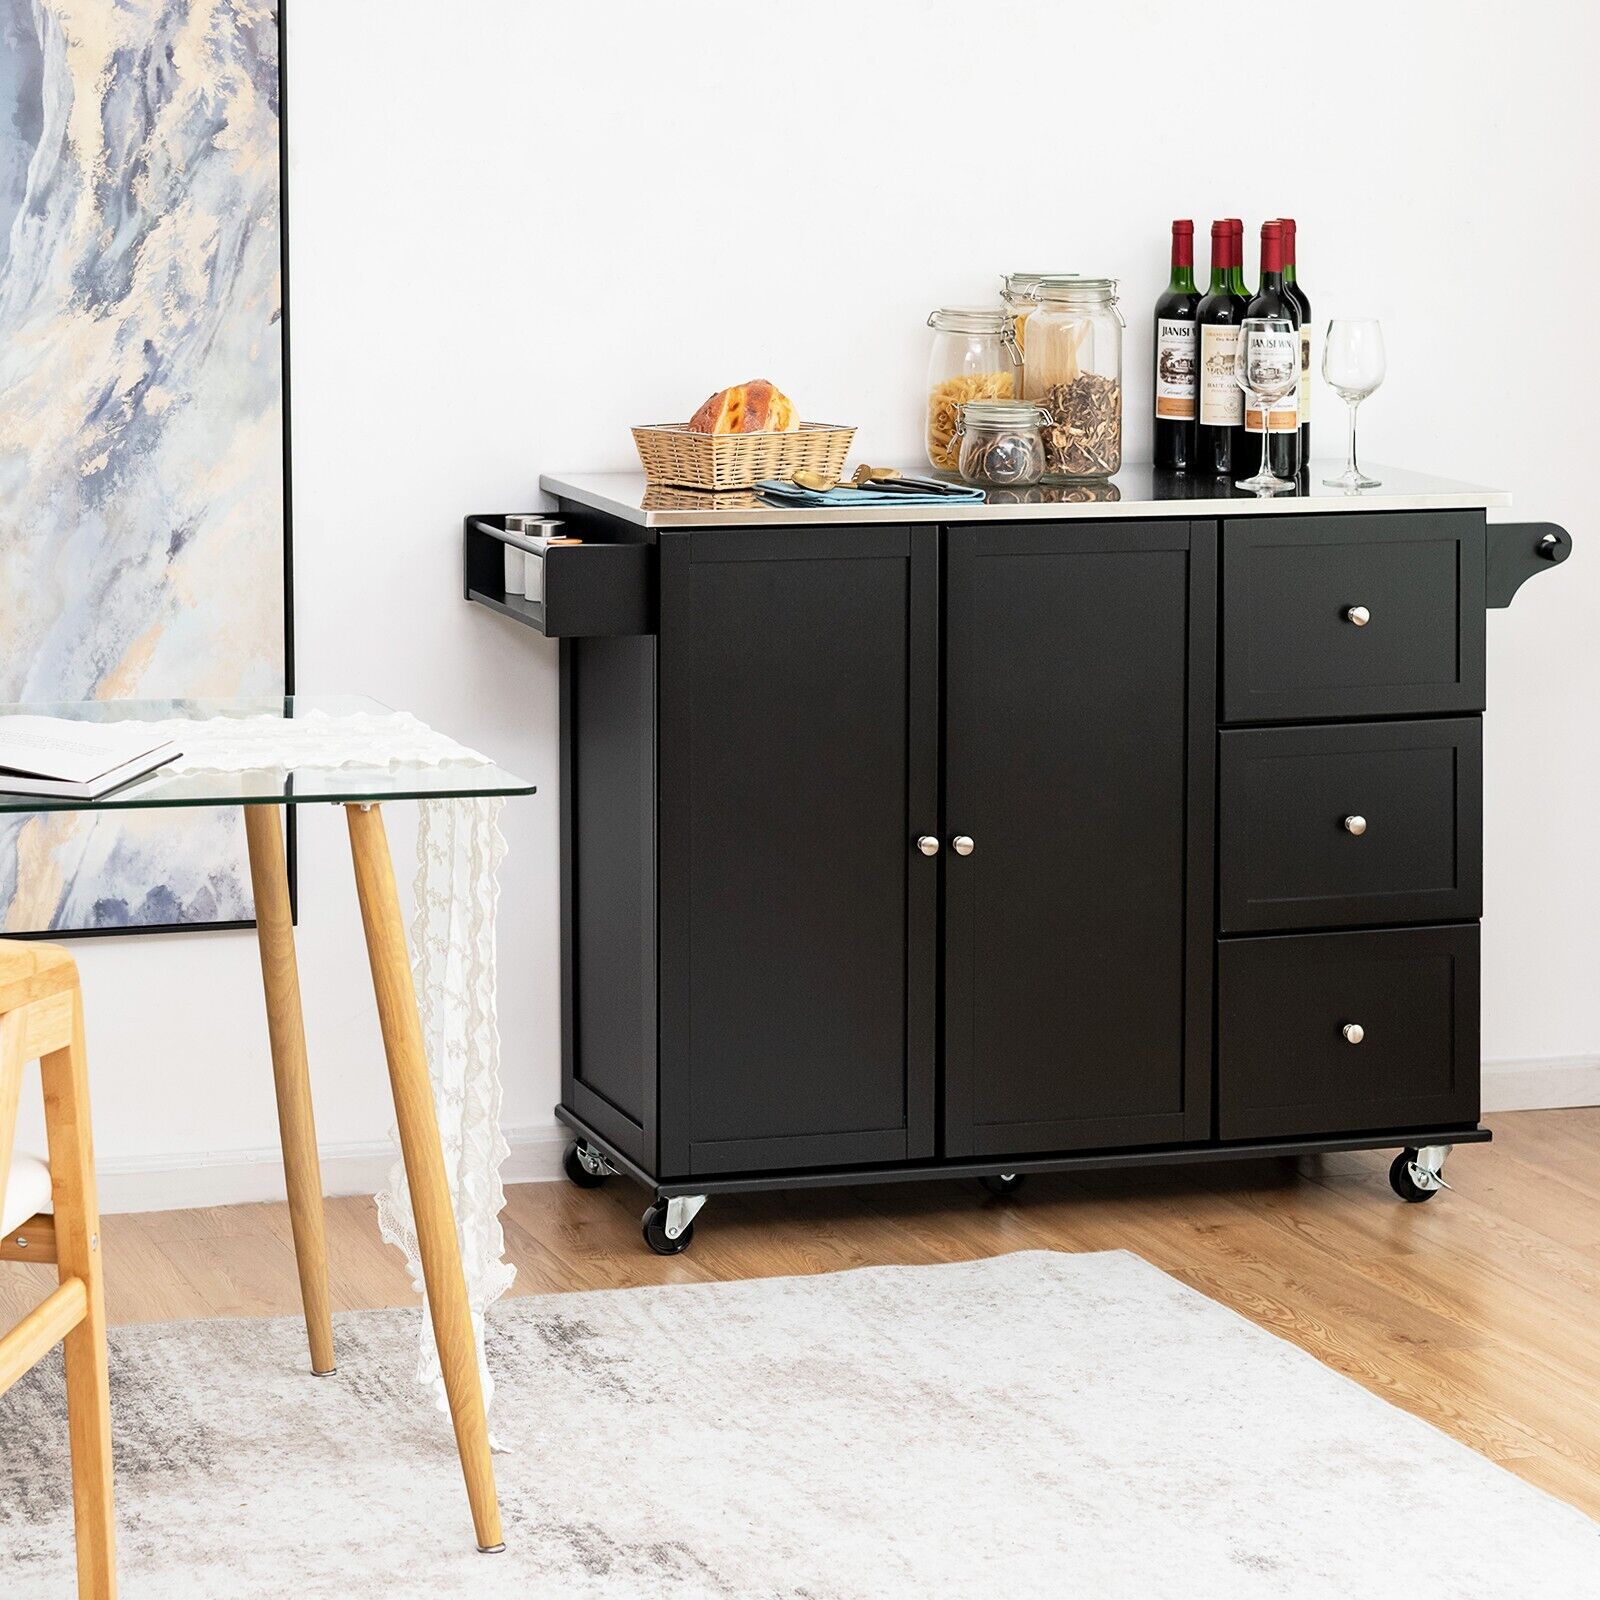 2-Doors Rolling Kitchen Island Cart with 3 Drawers-Black